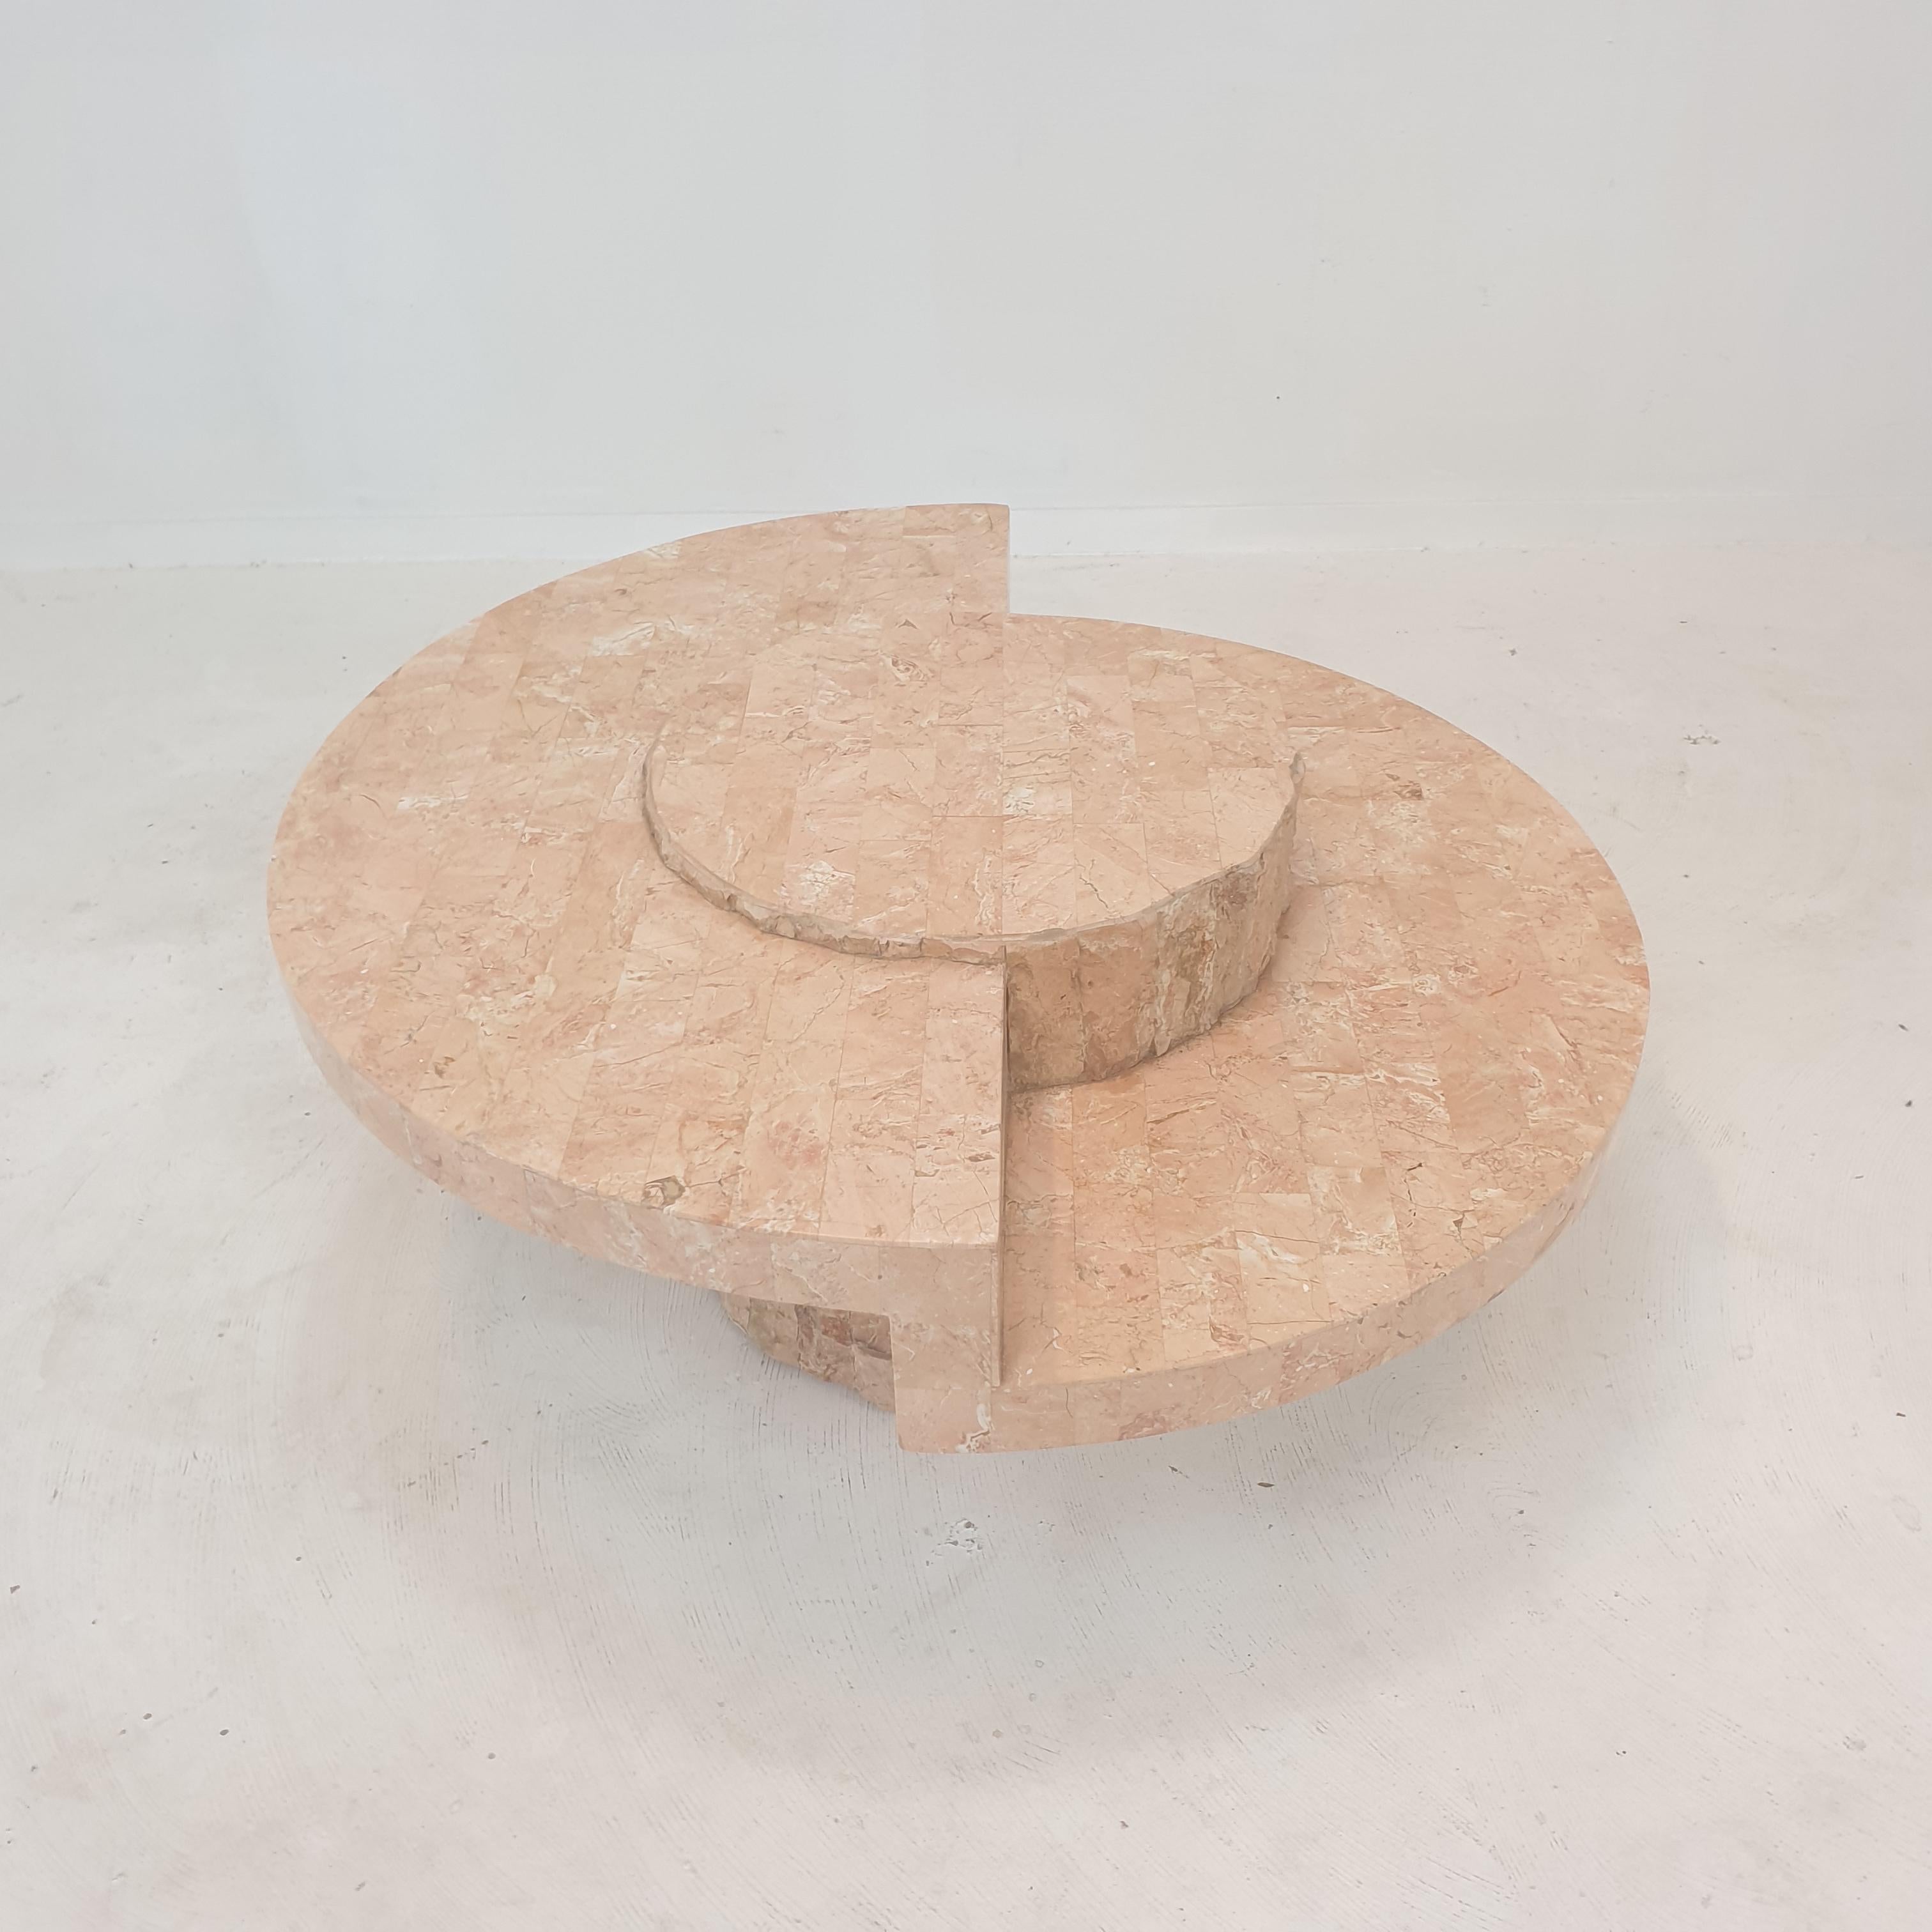 Very nice coffee or side table by Magnussen Ponte, 1980's.

This stunning table is made of rough edged brick motif Mactan stone or Fossil stone.
The weight is around 25 kg (55 lbs).

We work with professional packers and shippers, we ship